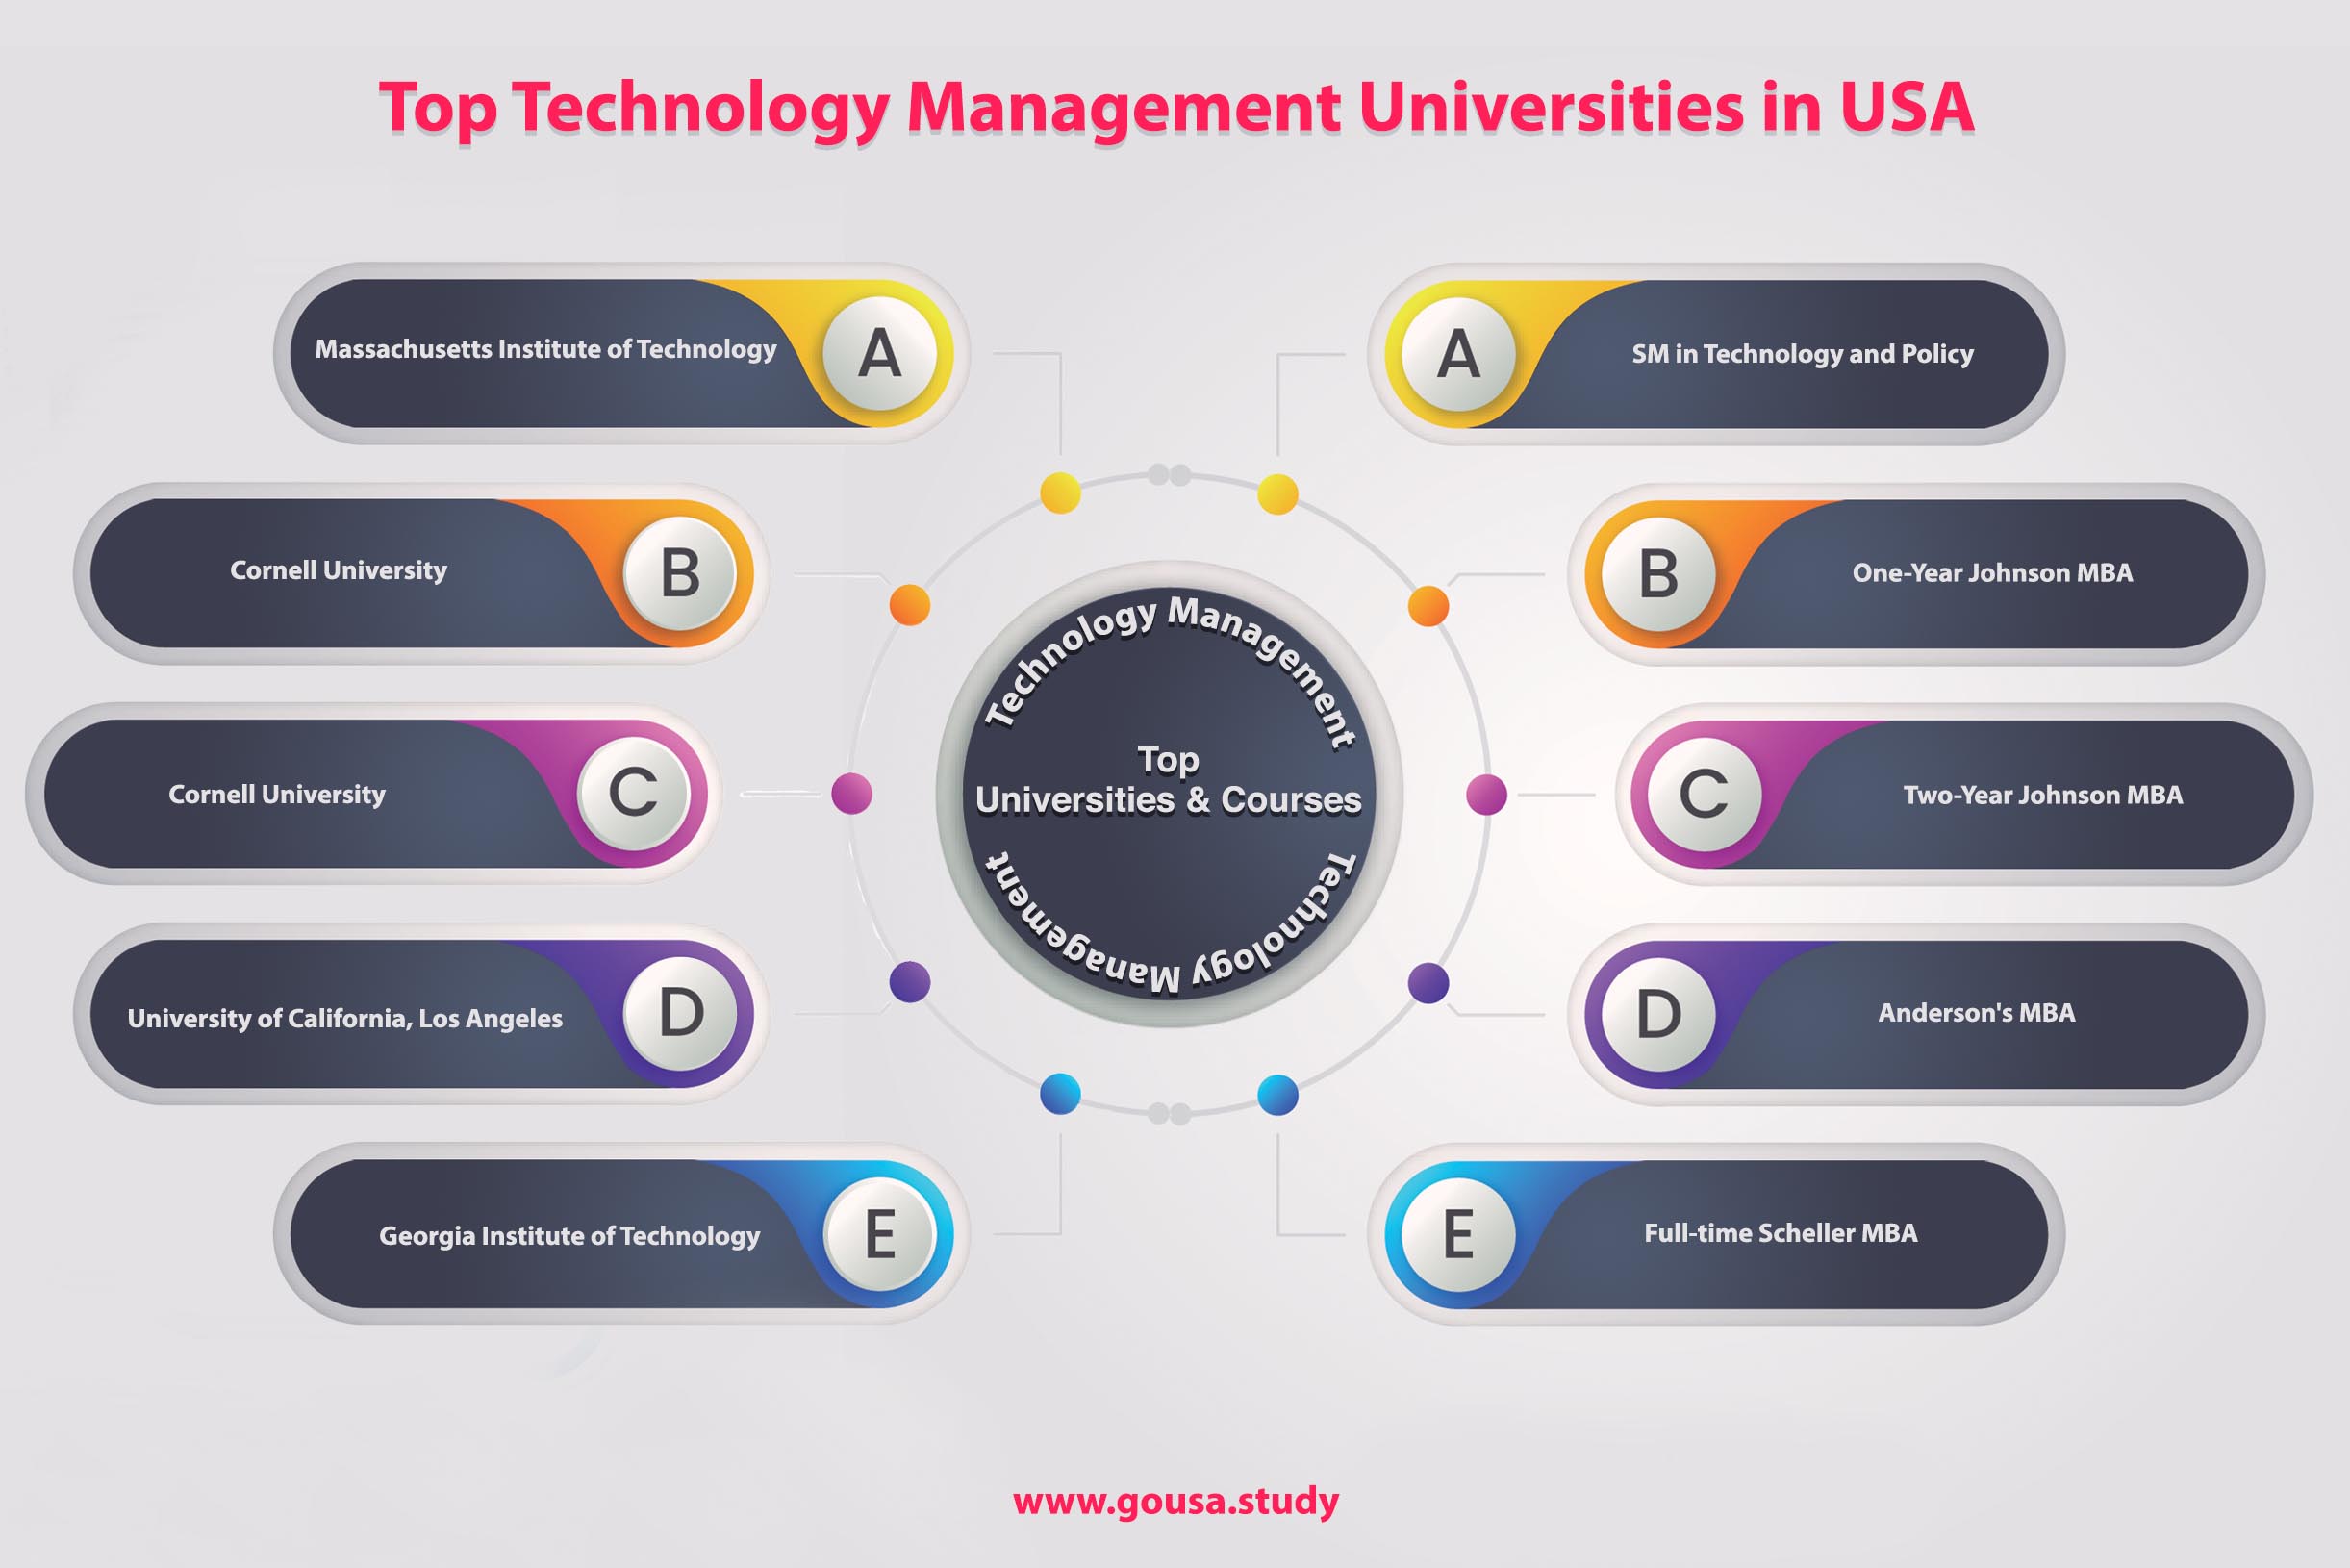 Top Technology Management Universities in USA